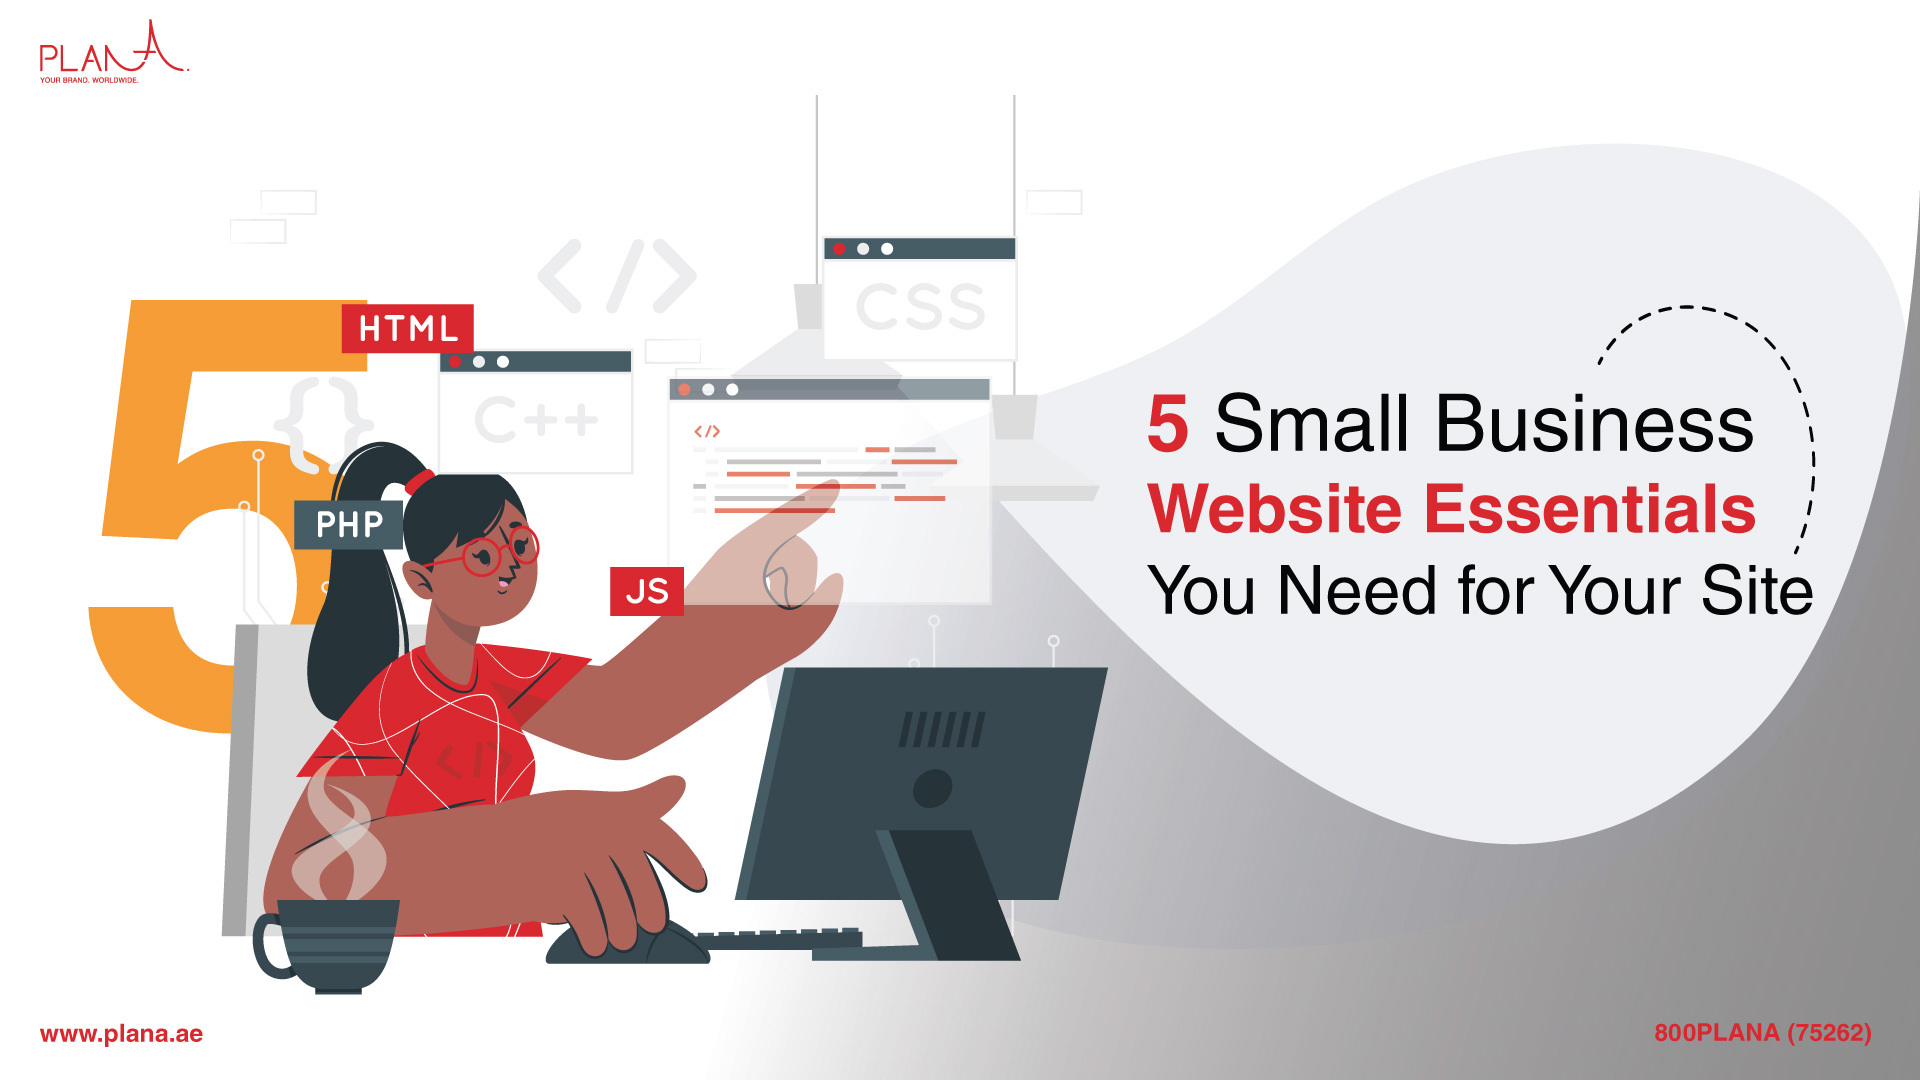 5 Small Business Website Essentials You Need for Your Site